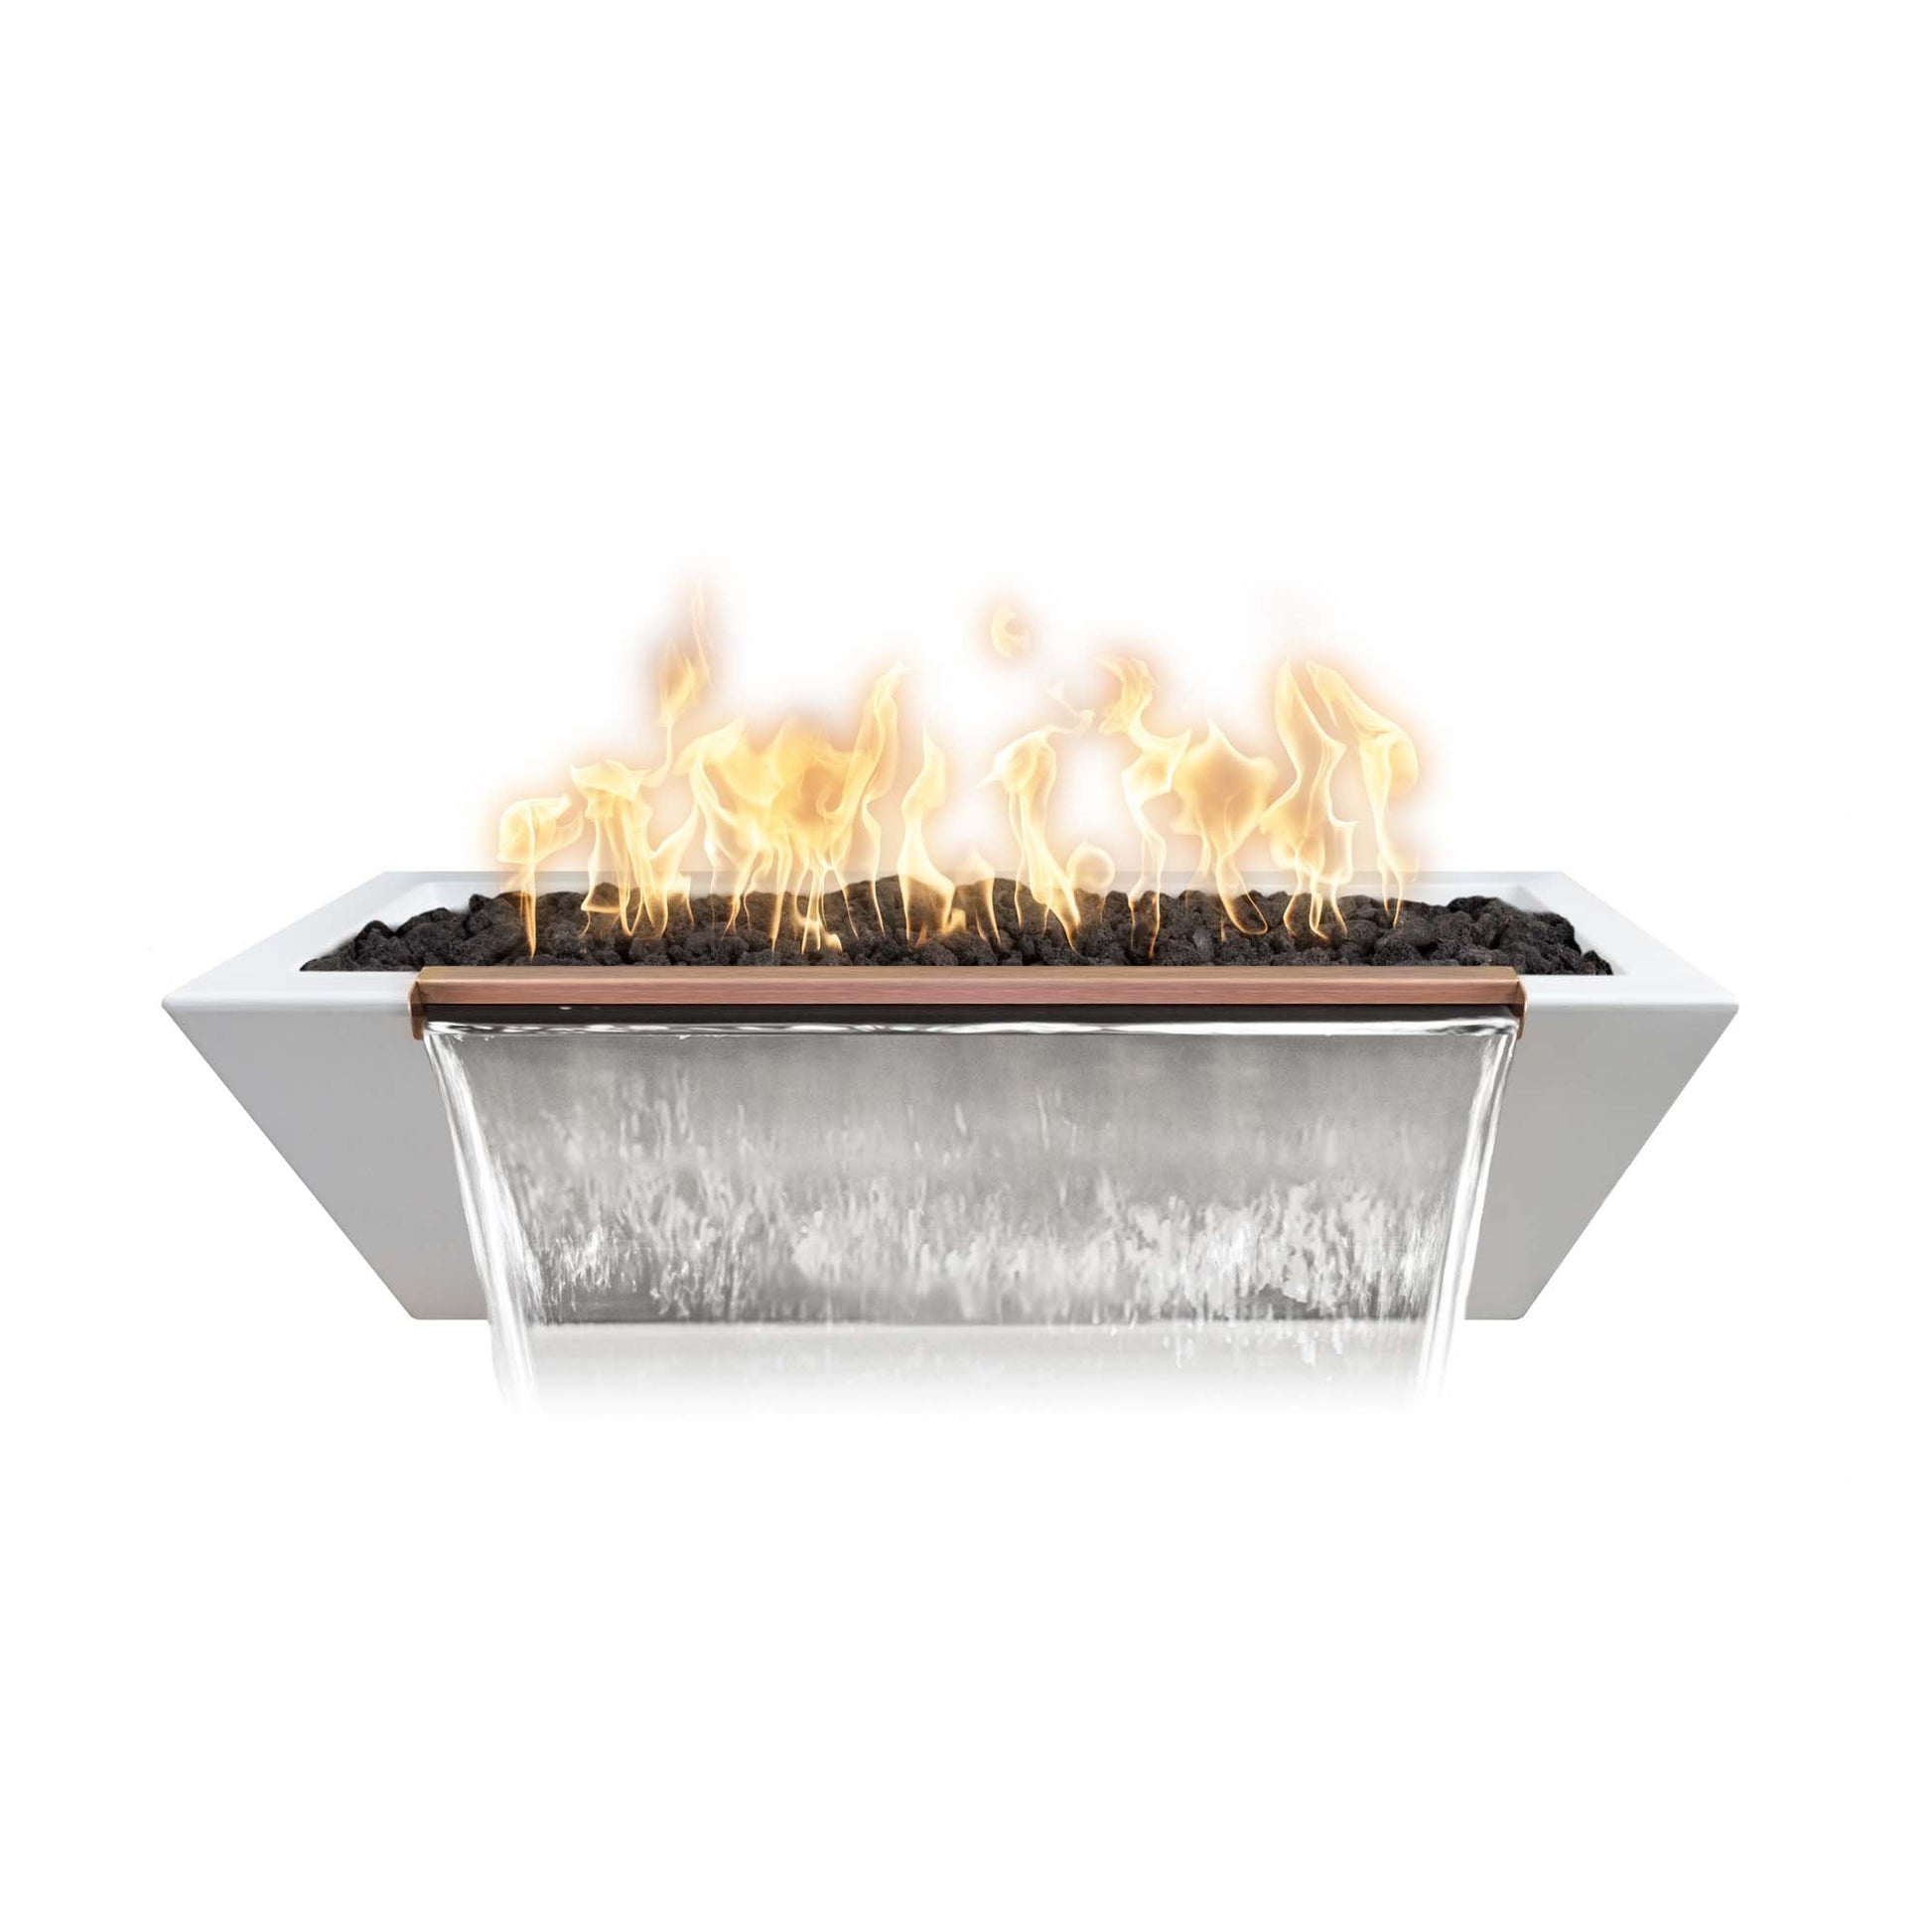 The Outdoor Plus Linear Maya 60" Metallic Bronze GFRC Concrete Liquid Propane Fire & Water Bowl with 12V Electronic Ignition